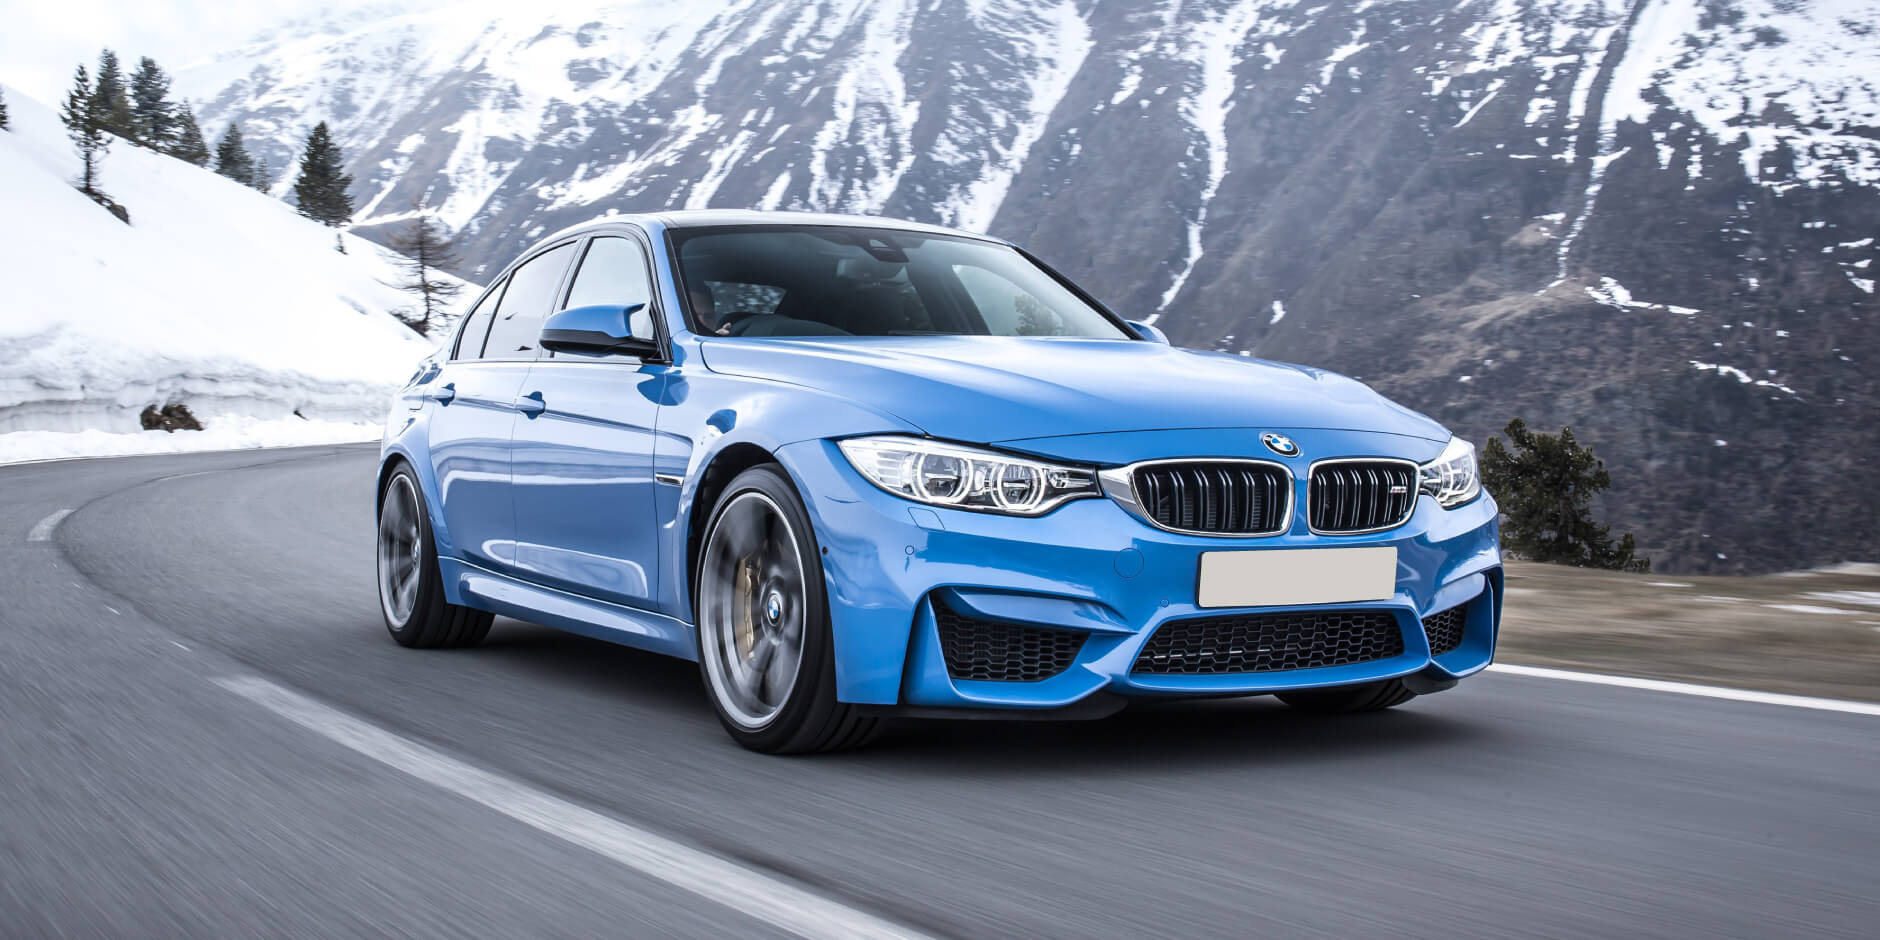 BMW vs Other Luxury Car Brands: Which is Best for You